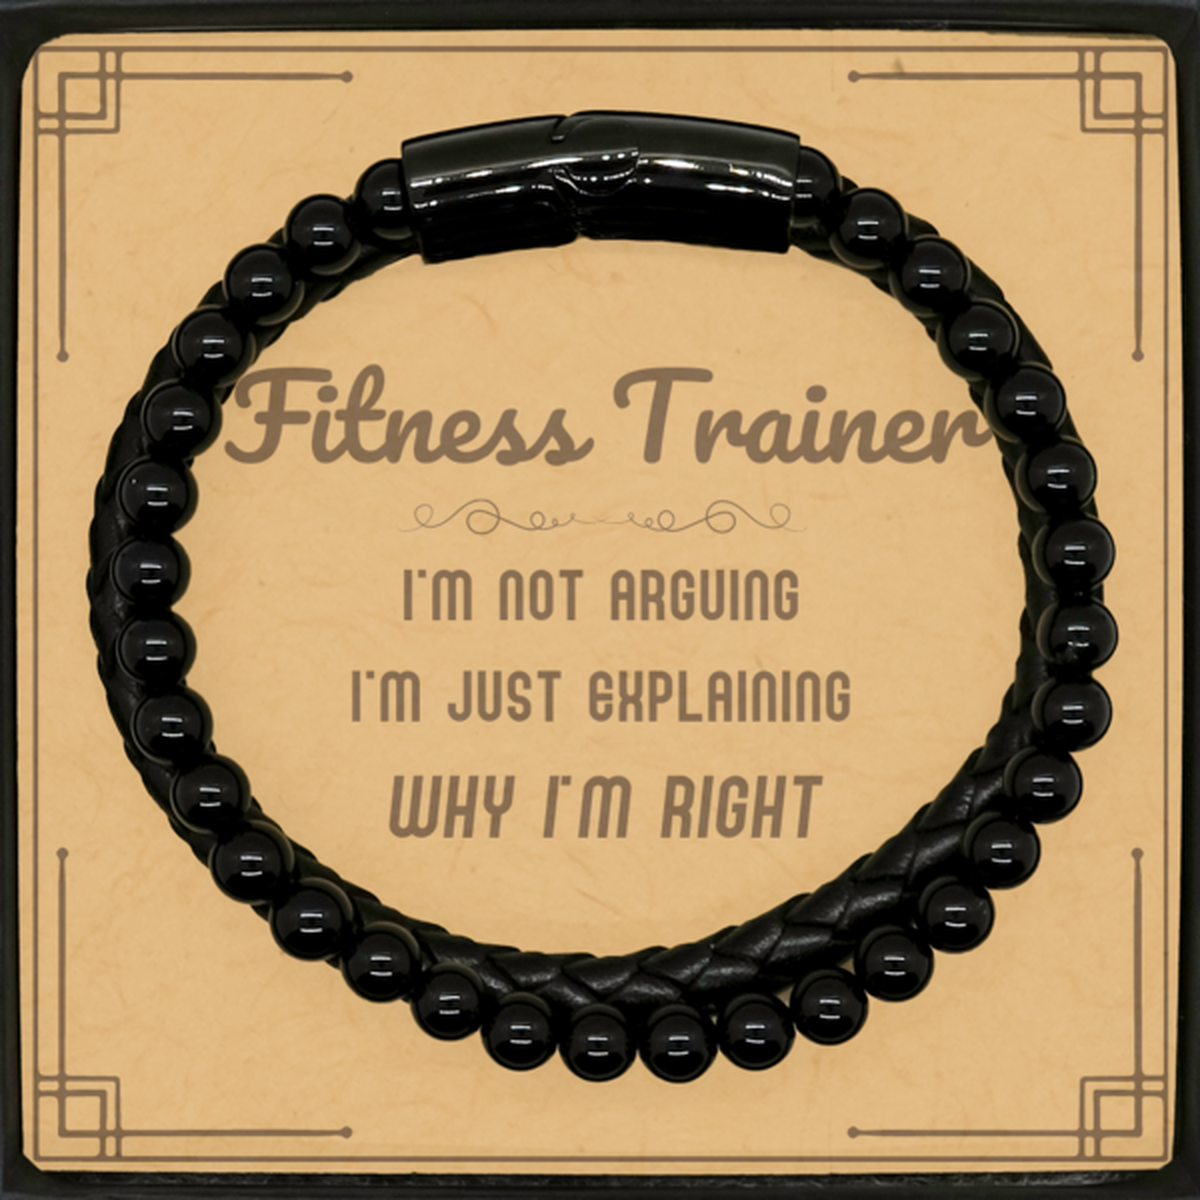 Fitness Trainer I'm not Arguing. I'm Just Explaining Why I'm RIGHT Stone Leather Bracelets, Funny Saying Quote Fitness Trainer Gifts For Fitness Trainer Message Card Graduation Birthday Christmas Gifts for Men Women Coworker